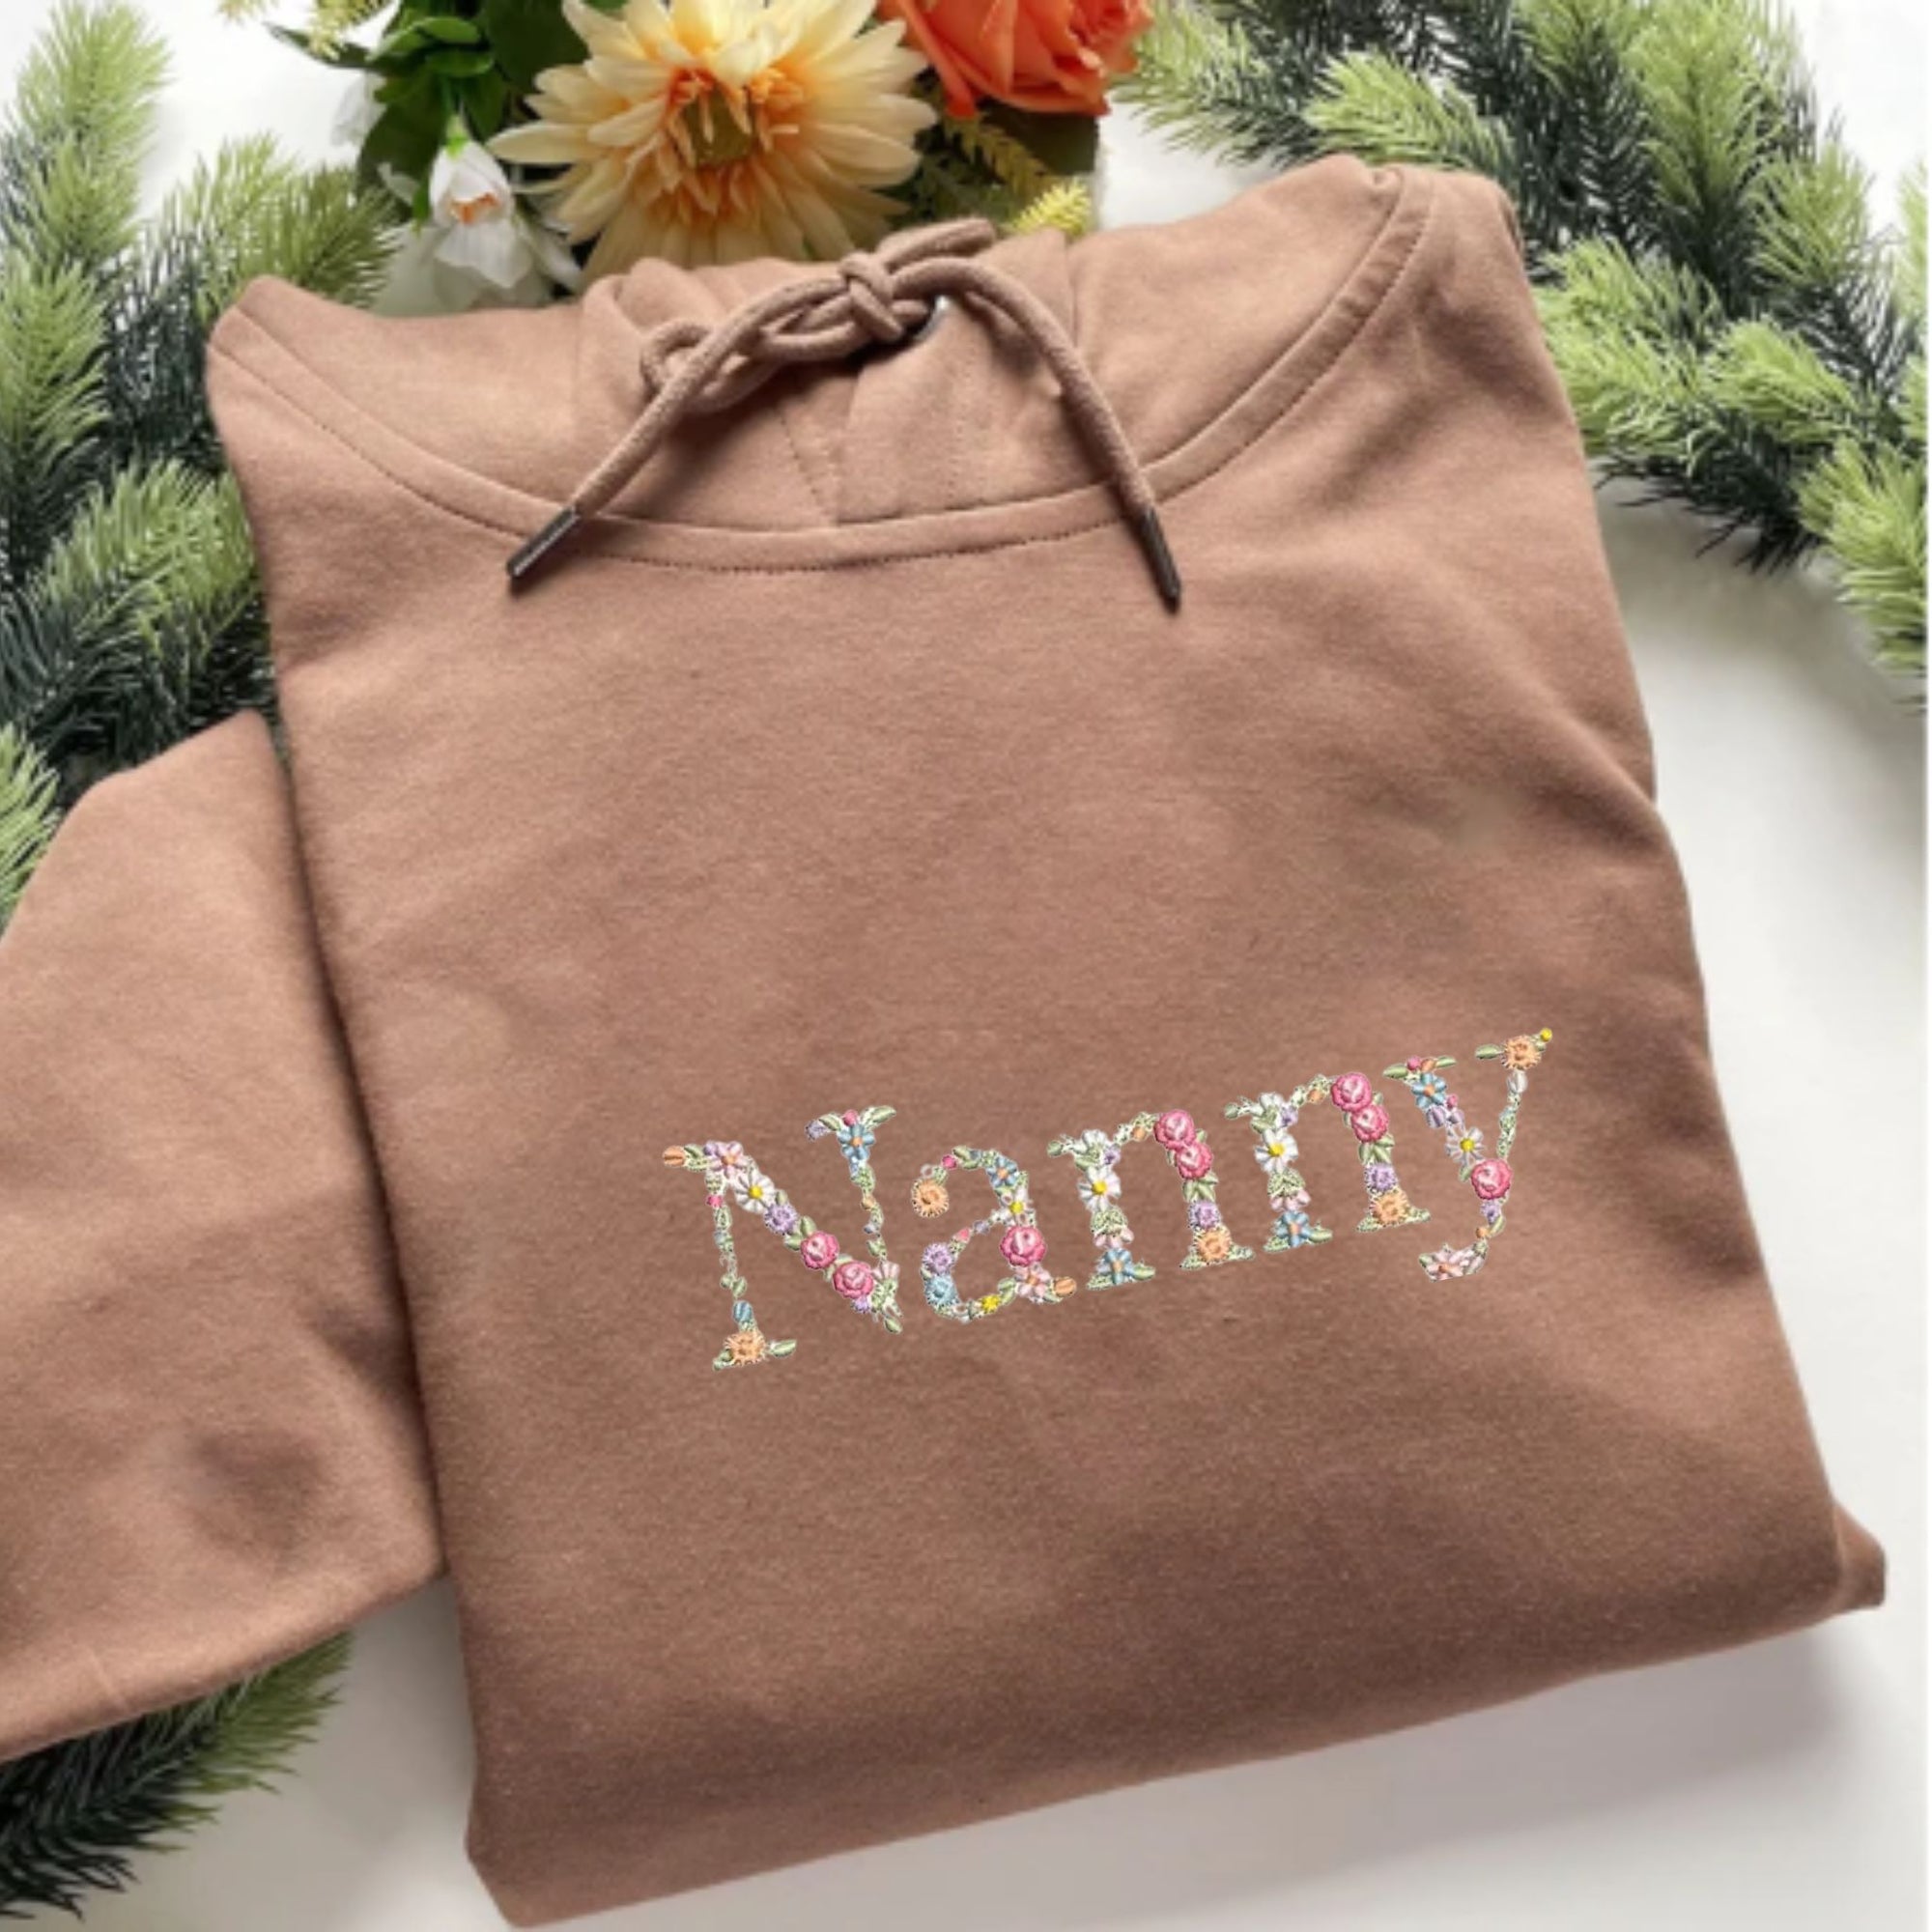 Custom Emroidered Floral Nanny Hoodie, Personalized Hood With Initial Or Icon On Sleeve, Unique Nanny Gift Ideas